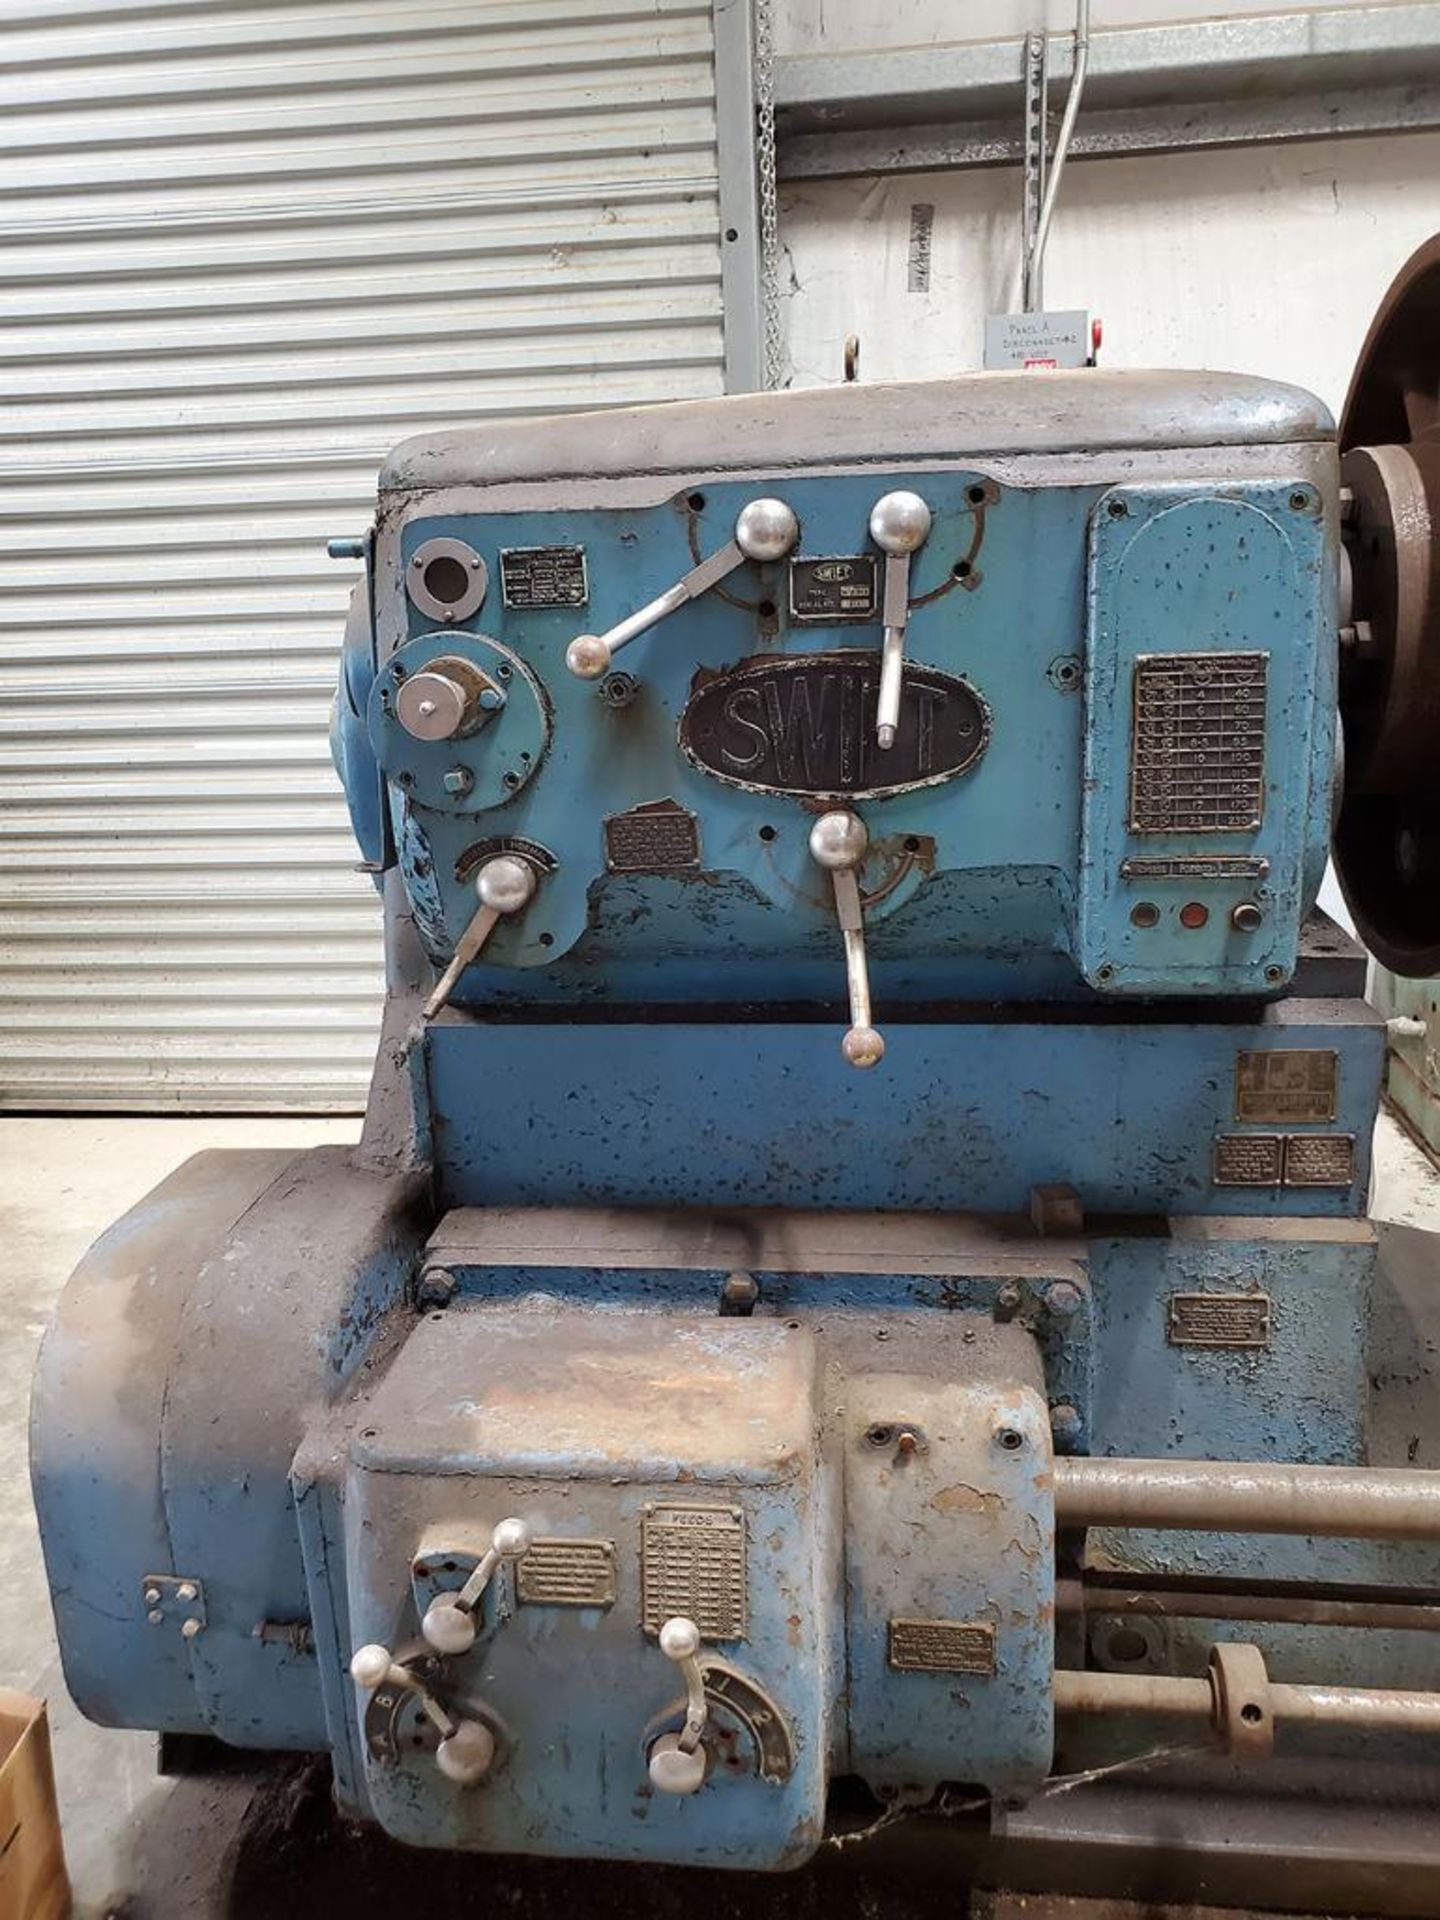 SWIFT ENGINE LATHE; MODEL 16-21.SV.5, S/N 13161, 11' BED, 32'' JAW CHUCK, 400-RPM SPINDLE, 4'' BAR - Image 4 of 11